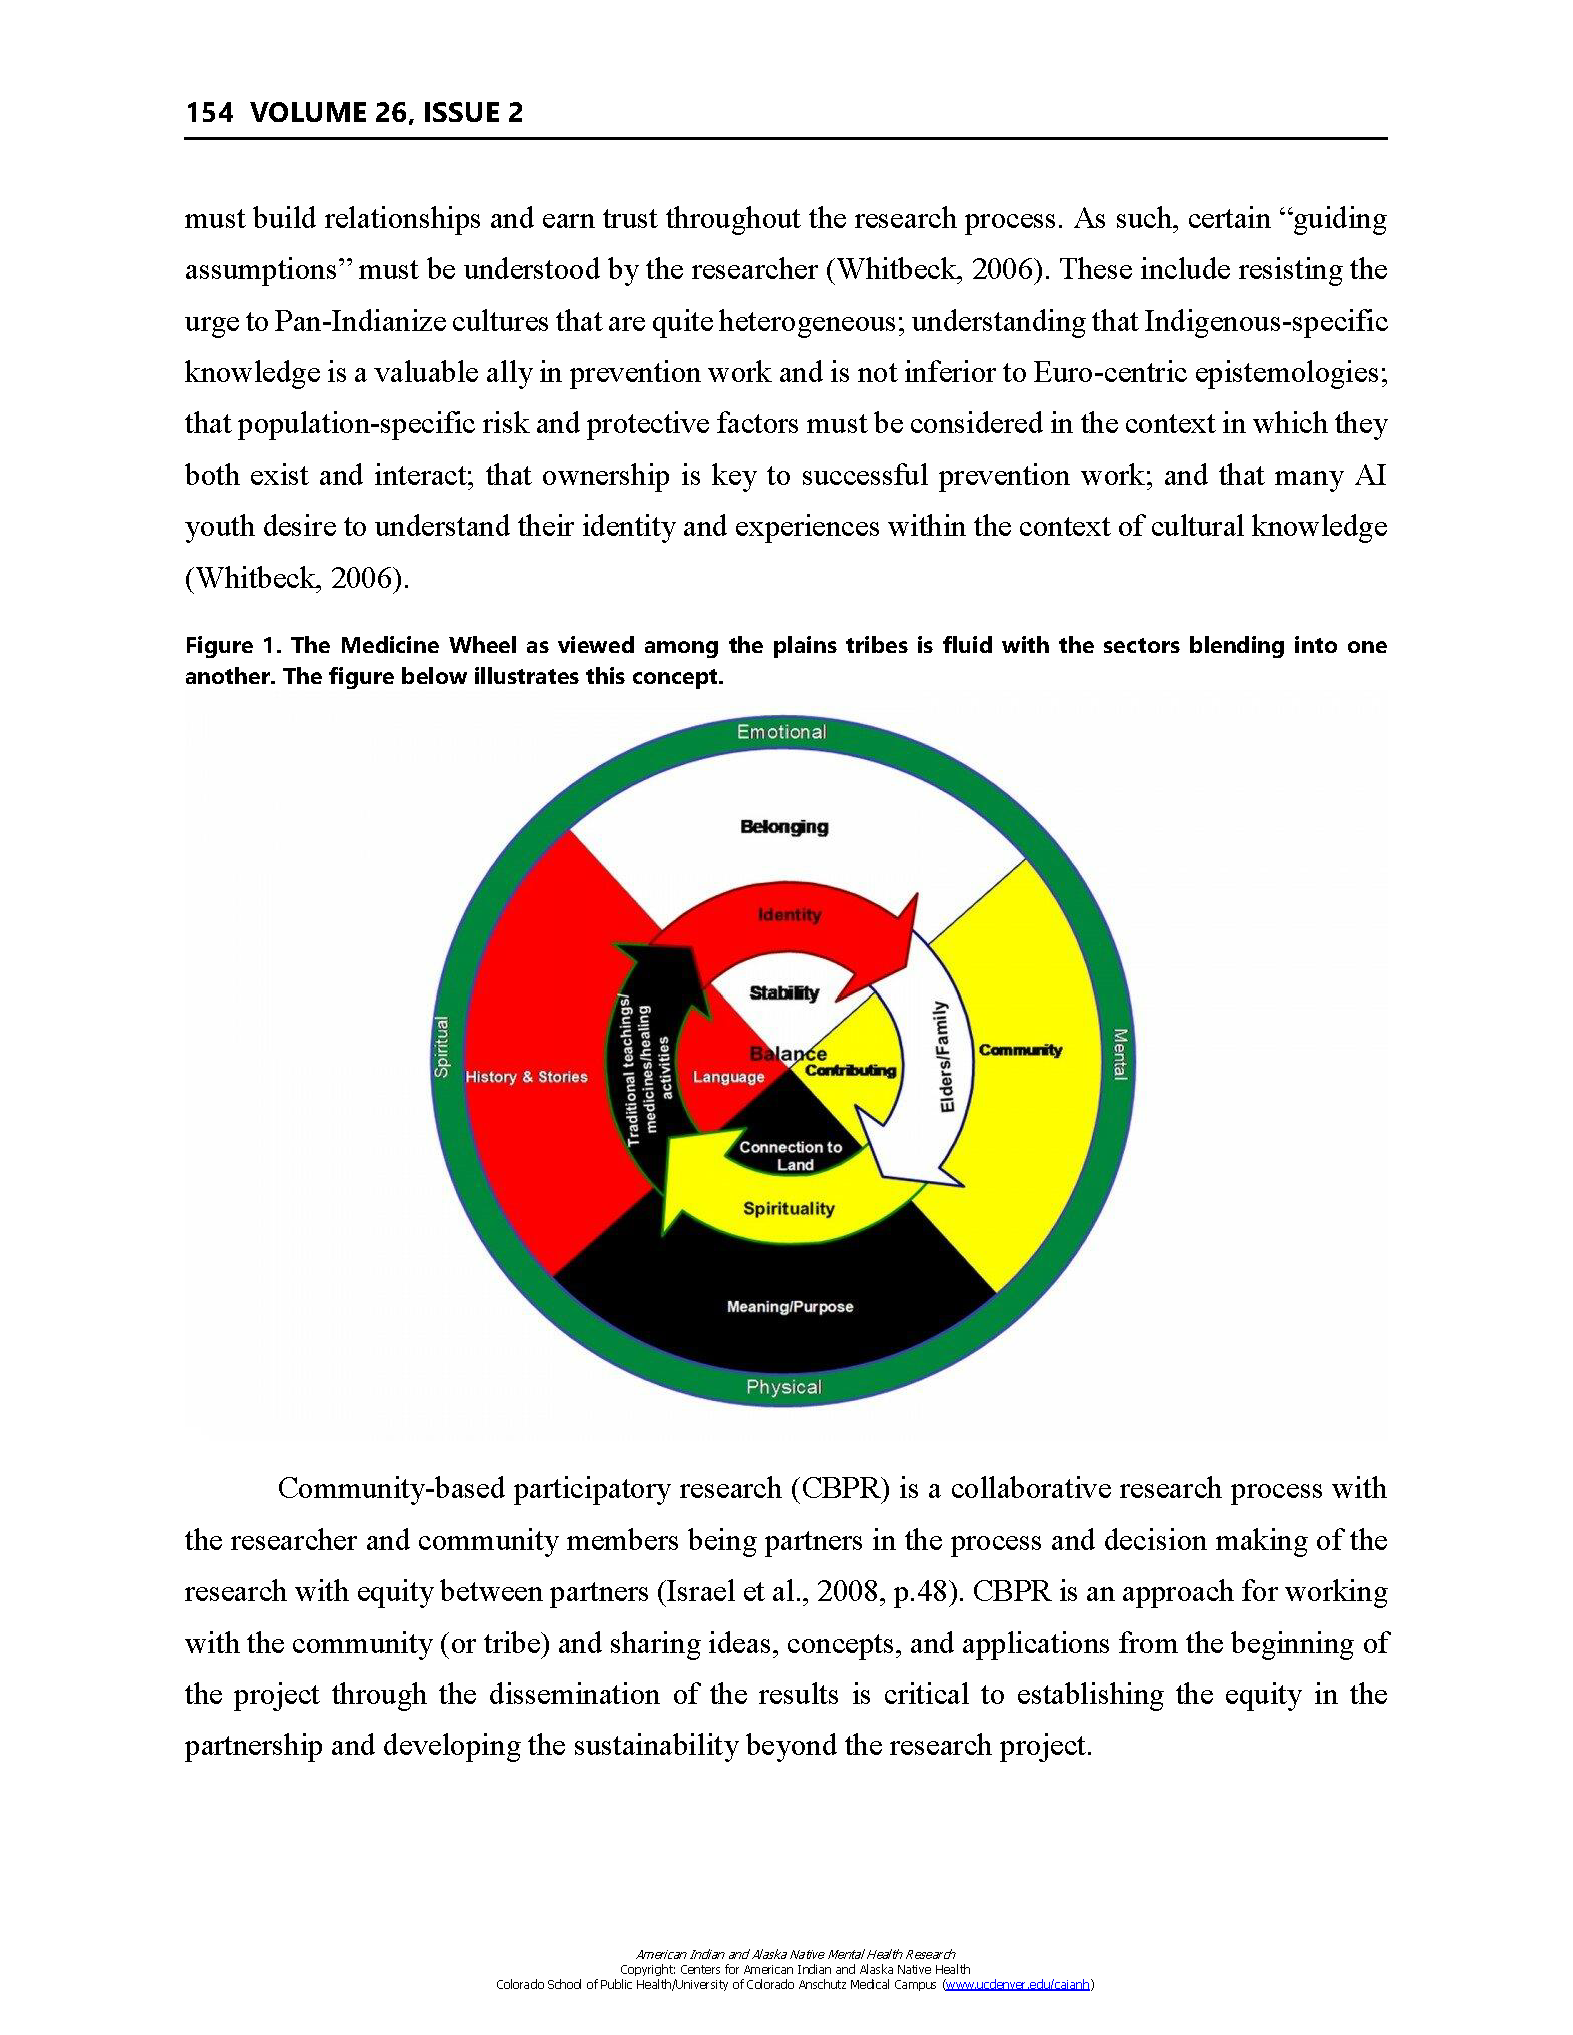 Screenshot of page 4 of the document with medicine wheel